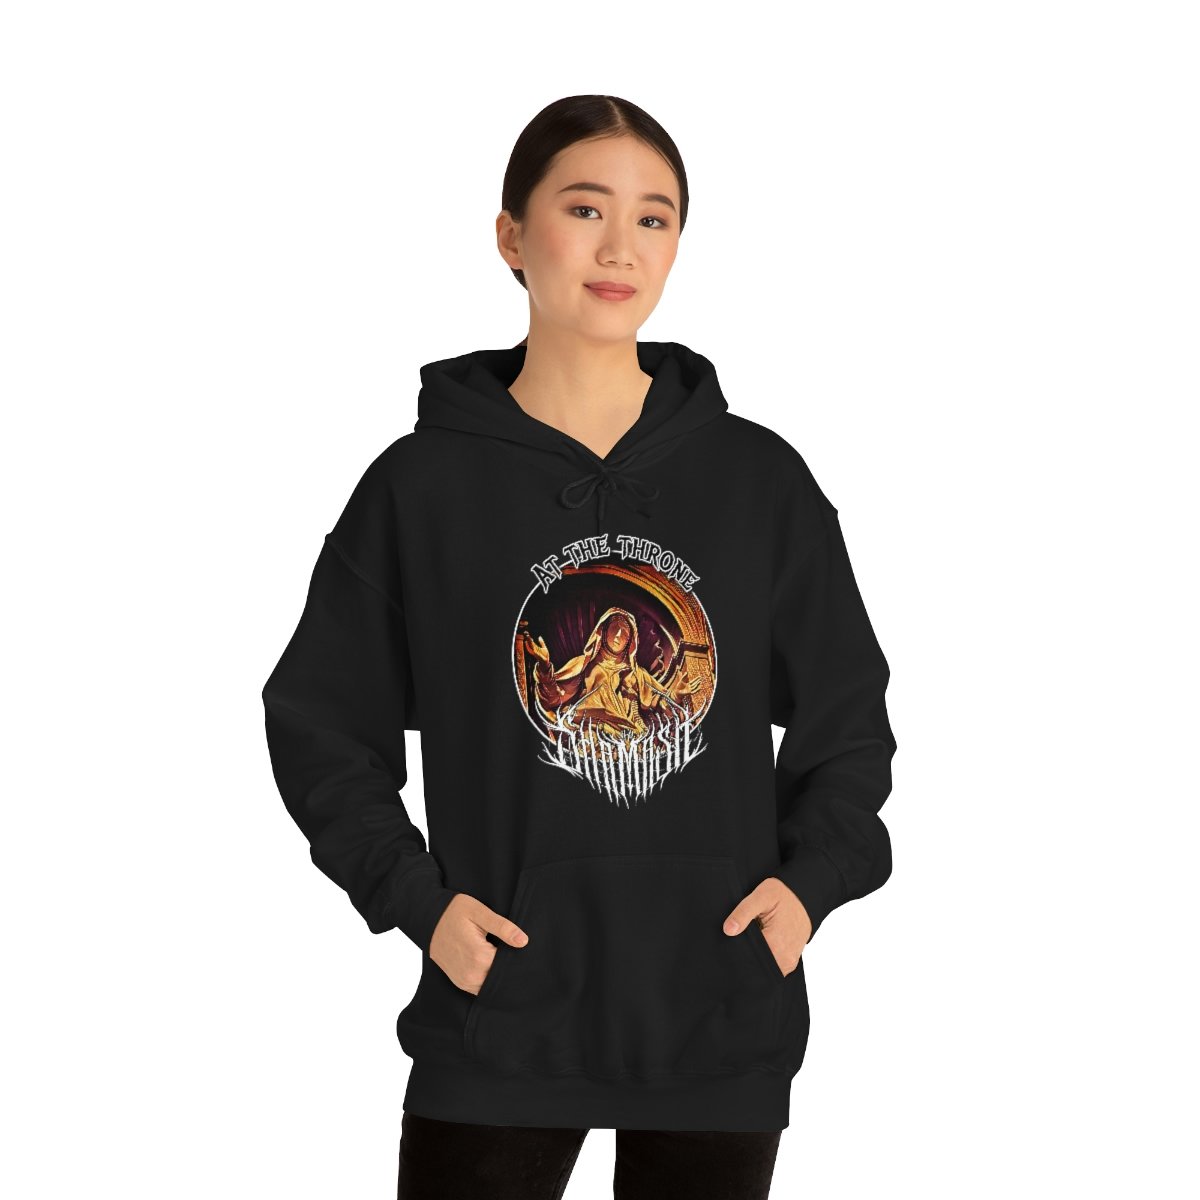 Shamash – At The Throne Pullover Hooded Sweatshirt